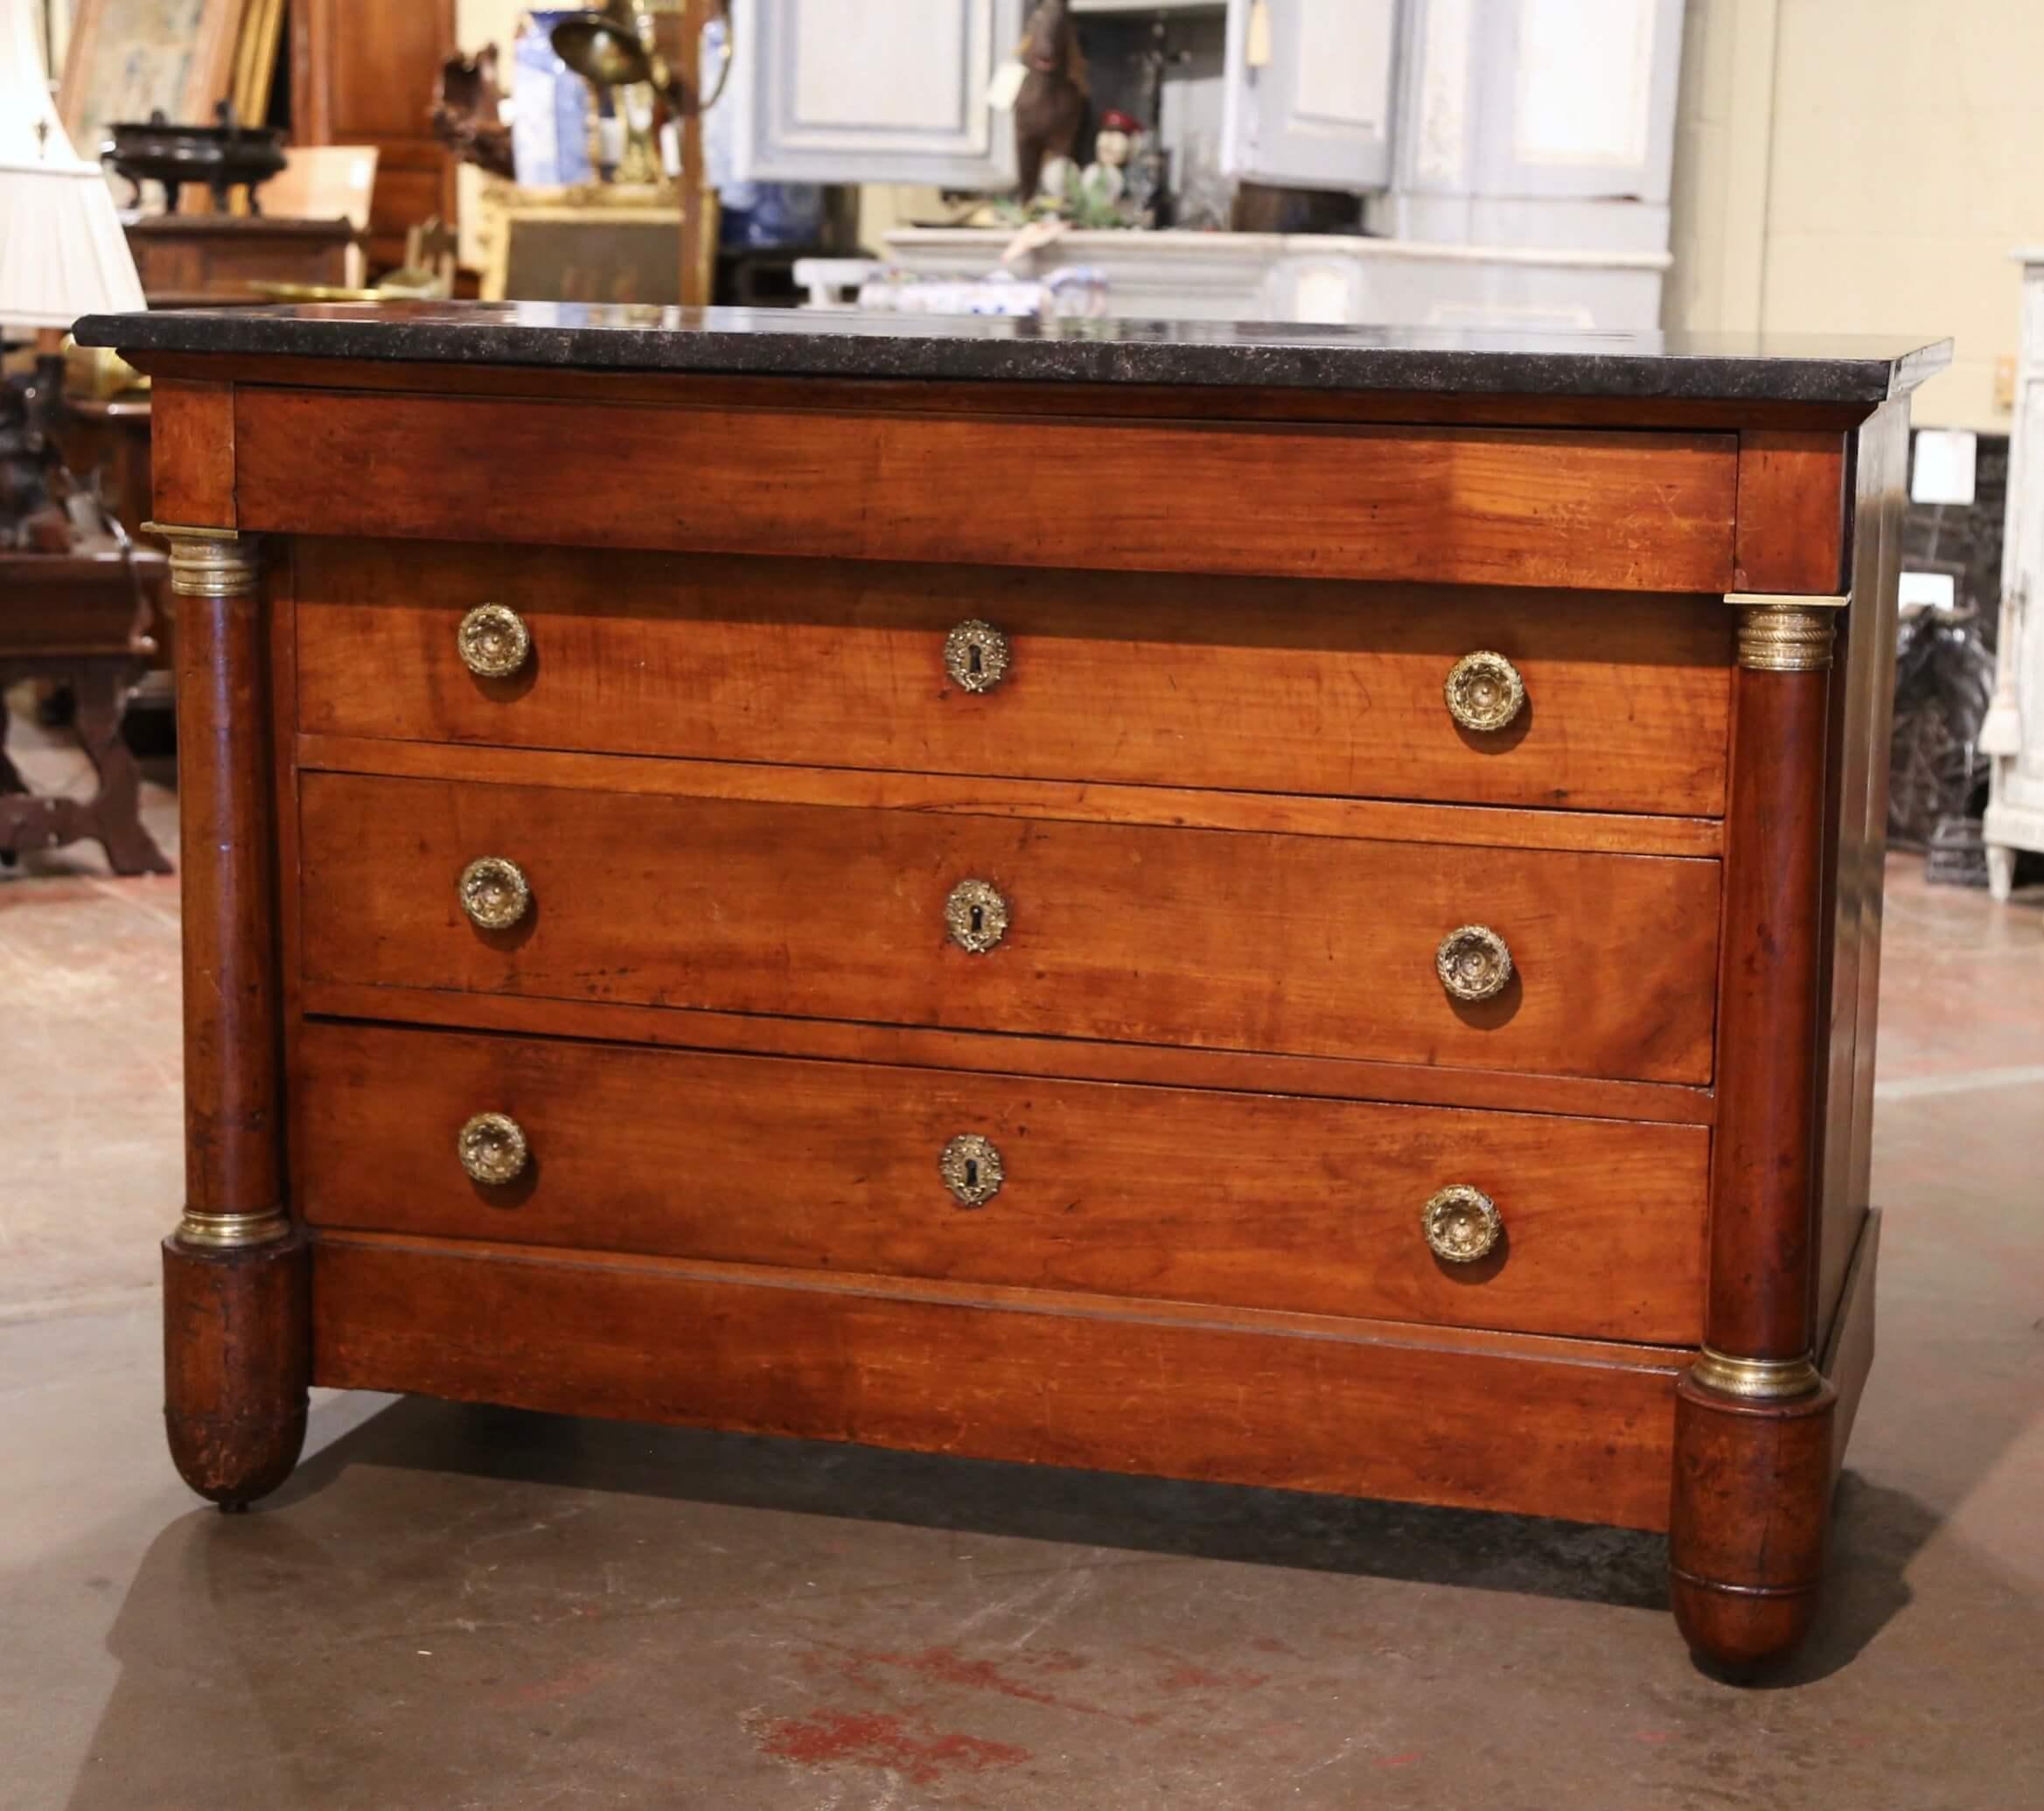 Bronze 19th Century French Empire Marble Top Carved Walnut Commode Chest of Drawers For Sale